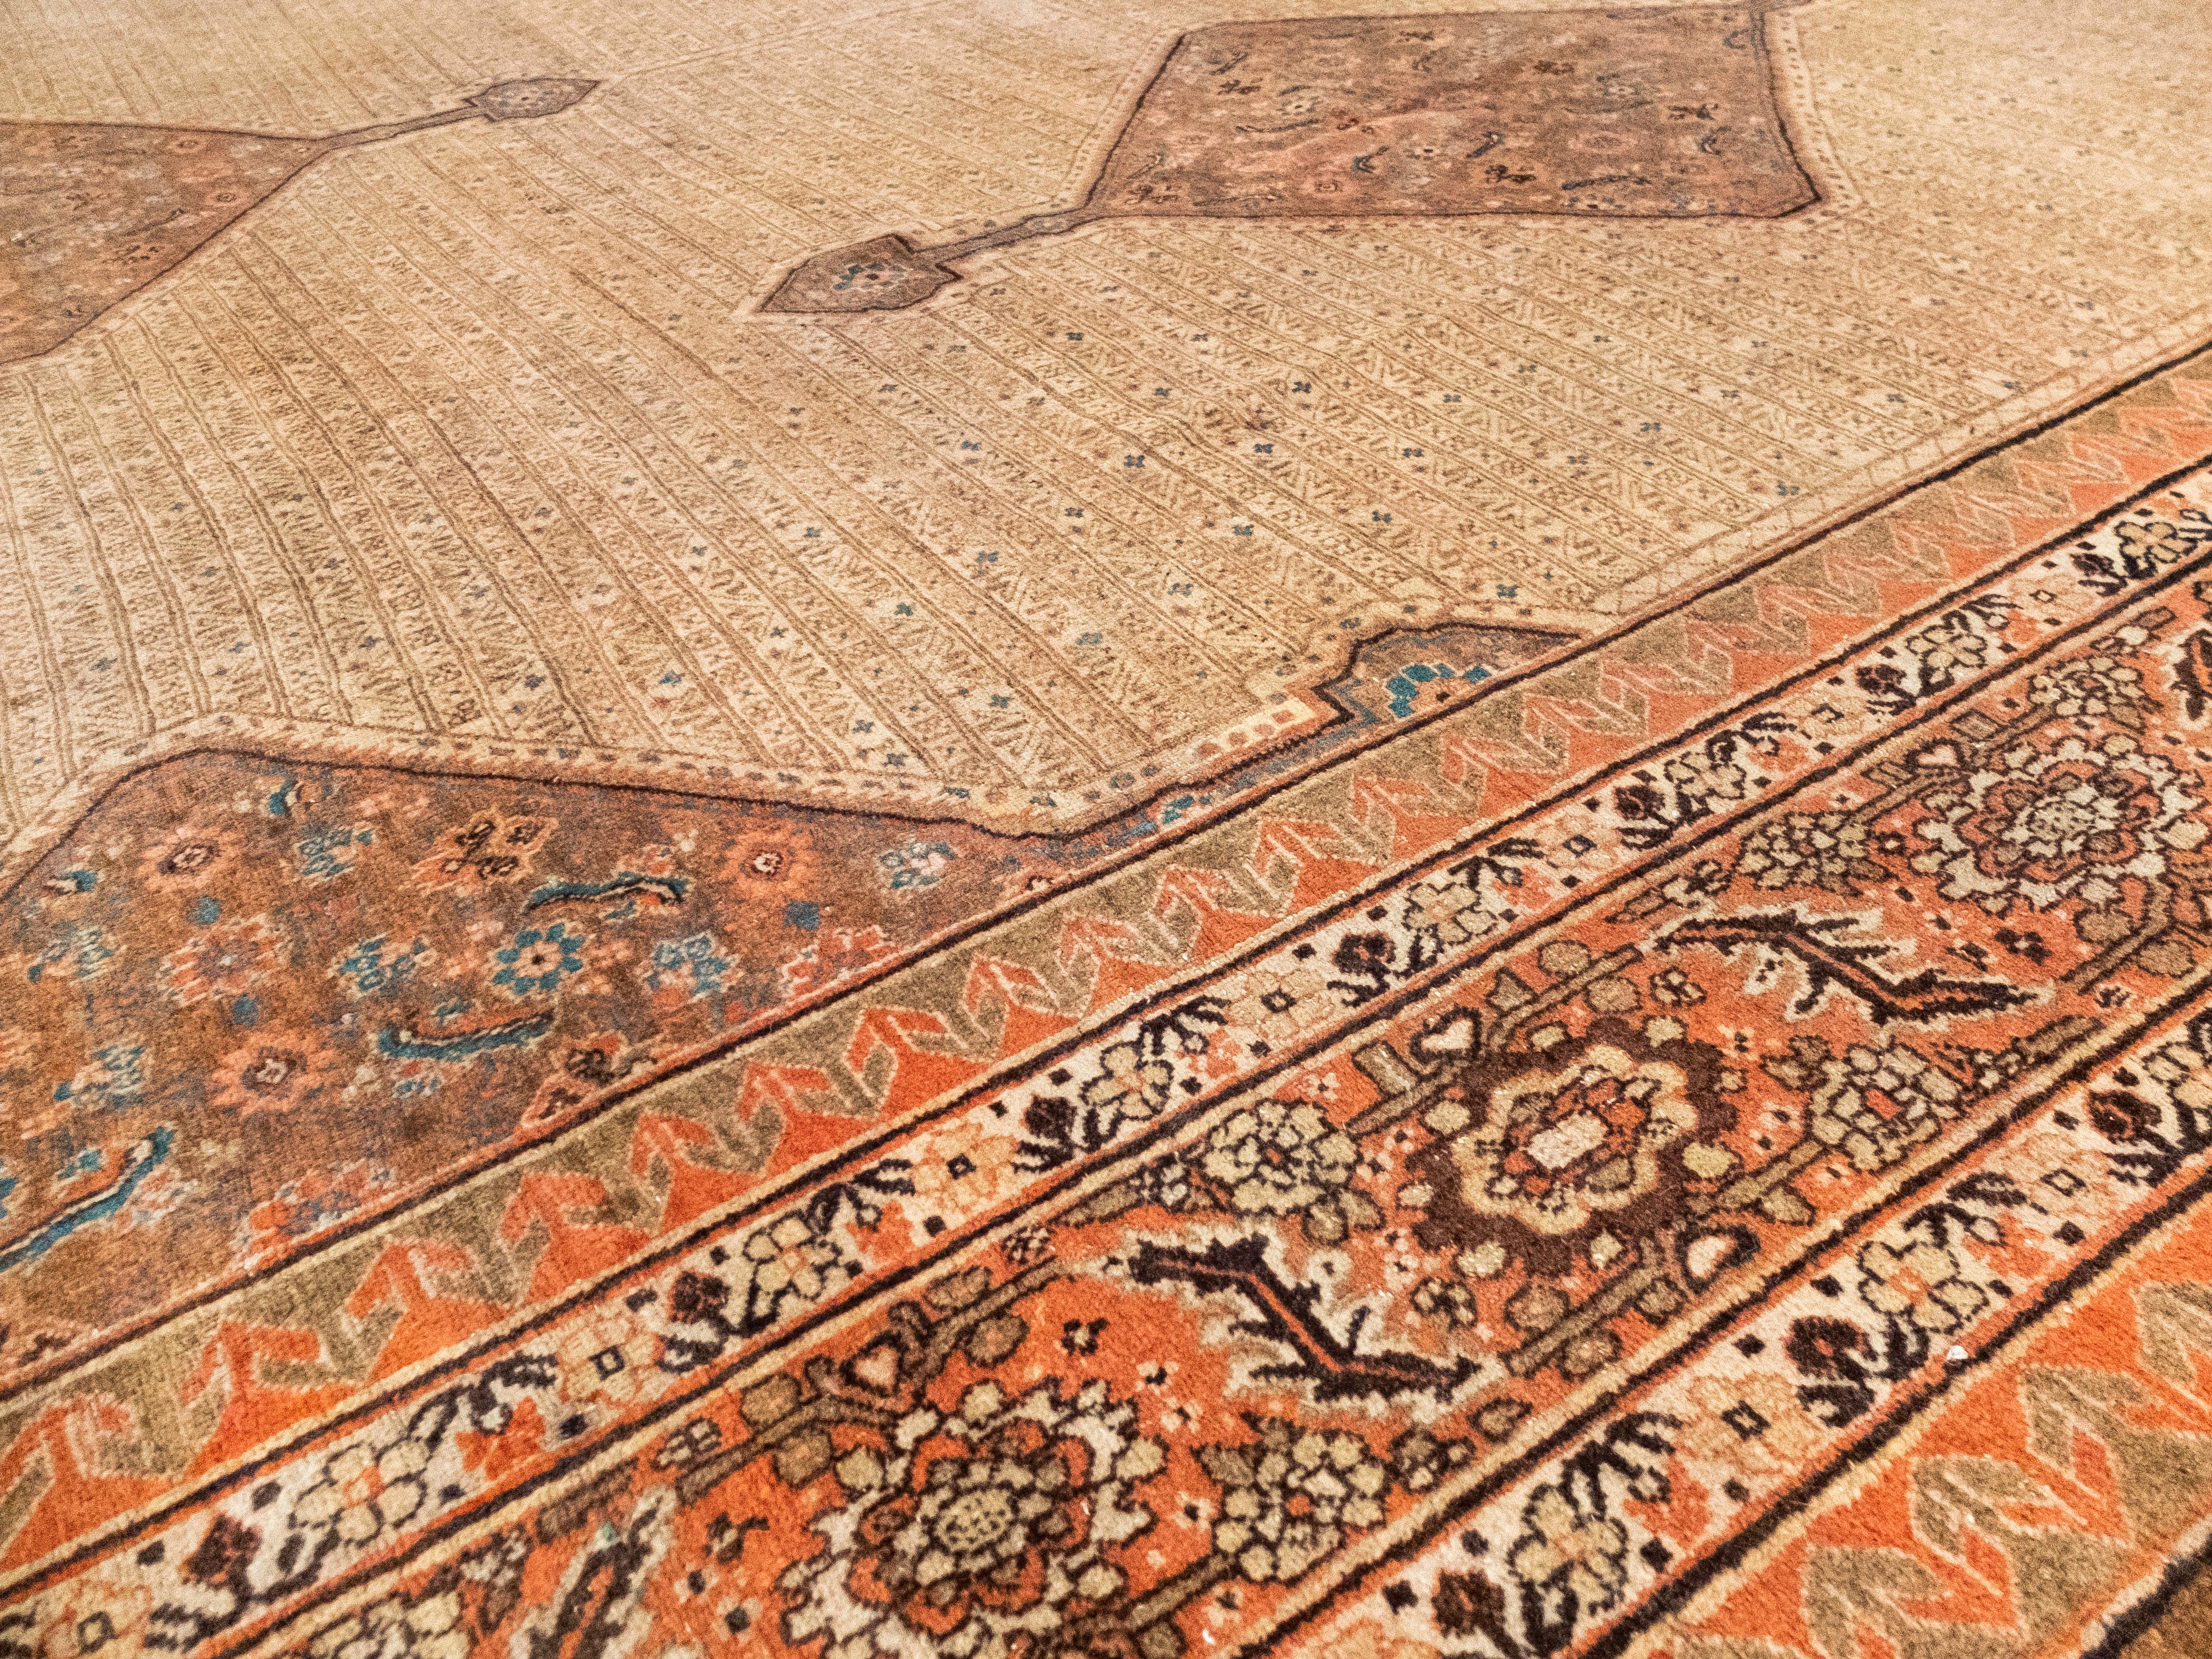 This is a Haji Jalili Tabriz rug meaning it comes from some of the most high-quality mill/houses of its time. It displays exquisite earth tones such as tan, reddish browns, and burnt sienna. Its main field has 5 diamond geometric shapes and inside